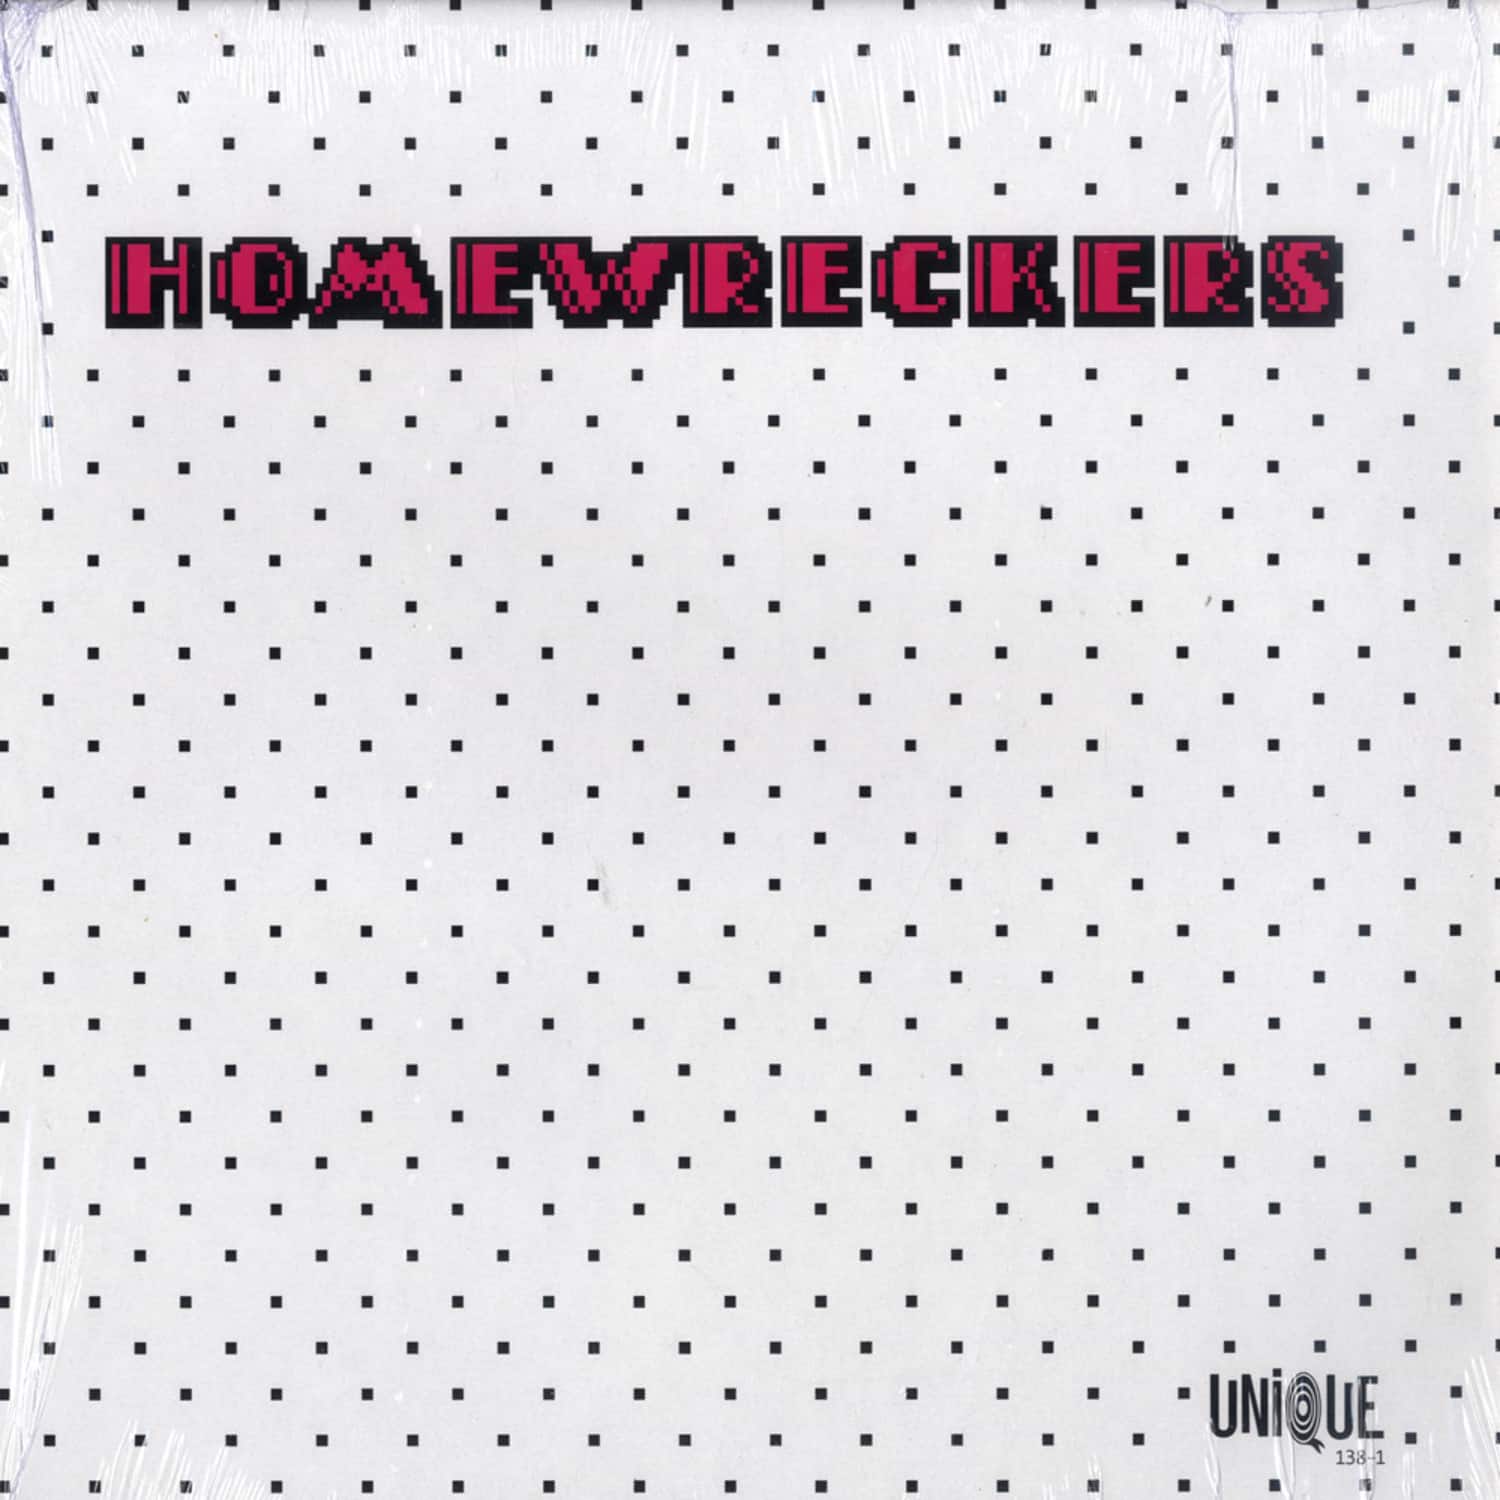 Homewreckers  - CLOSE YOUR EYES TIL THE MORNING